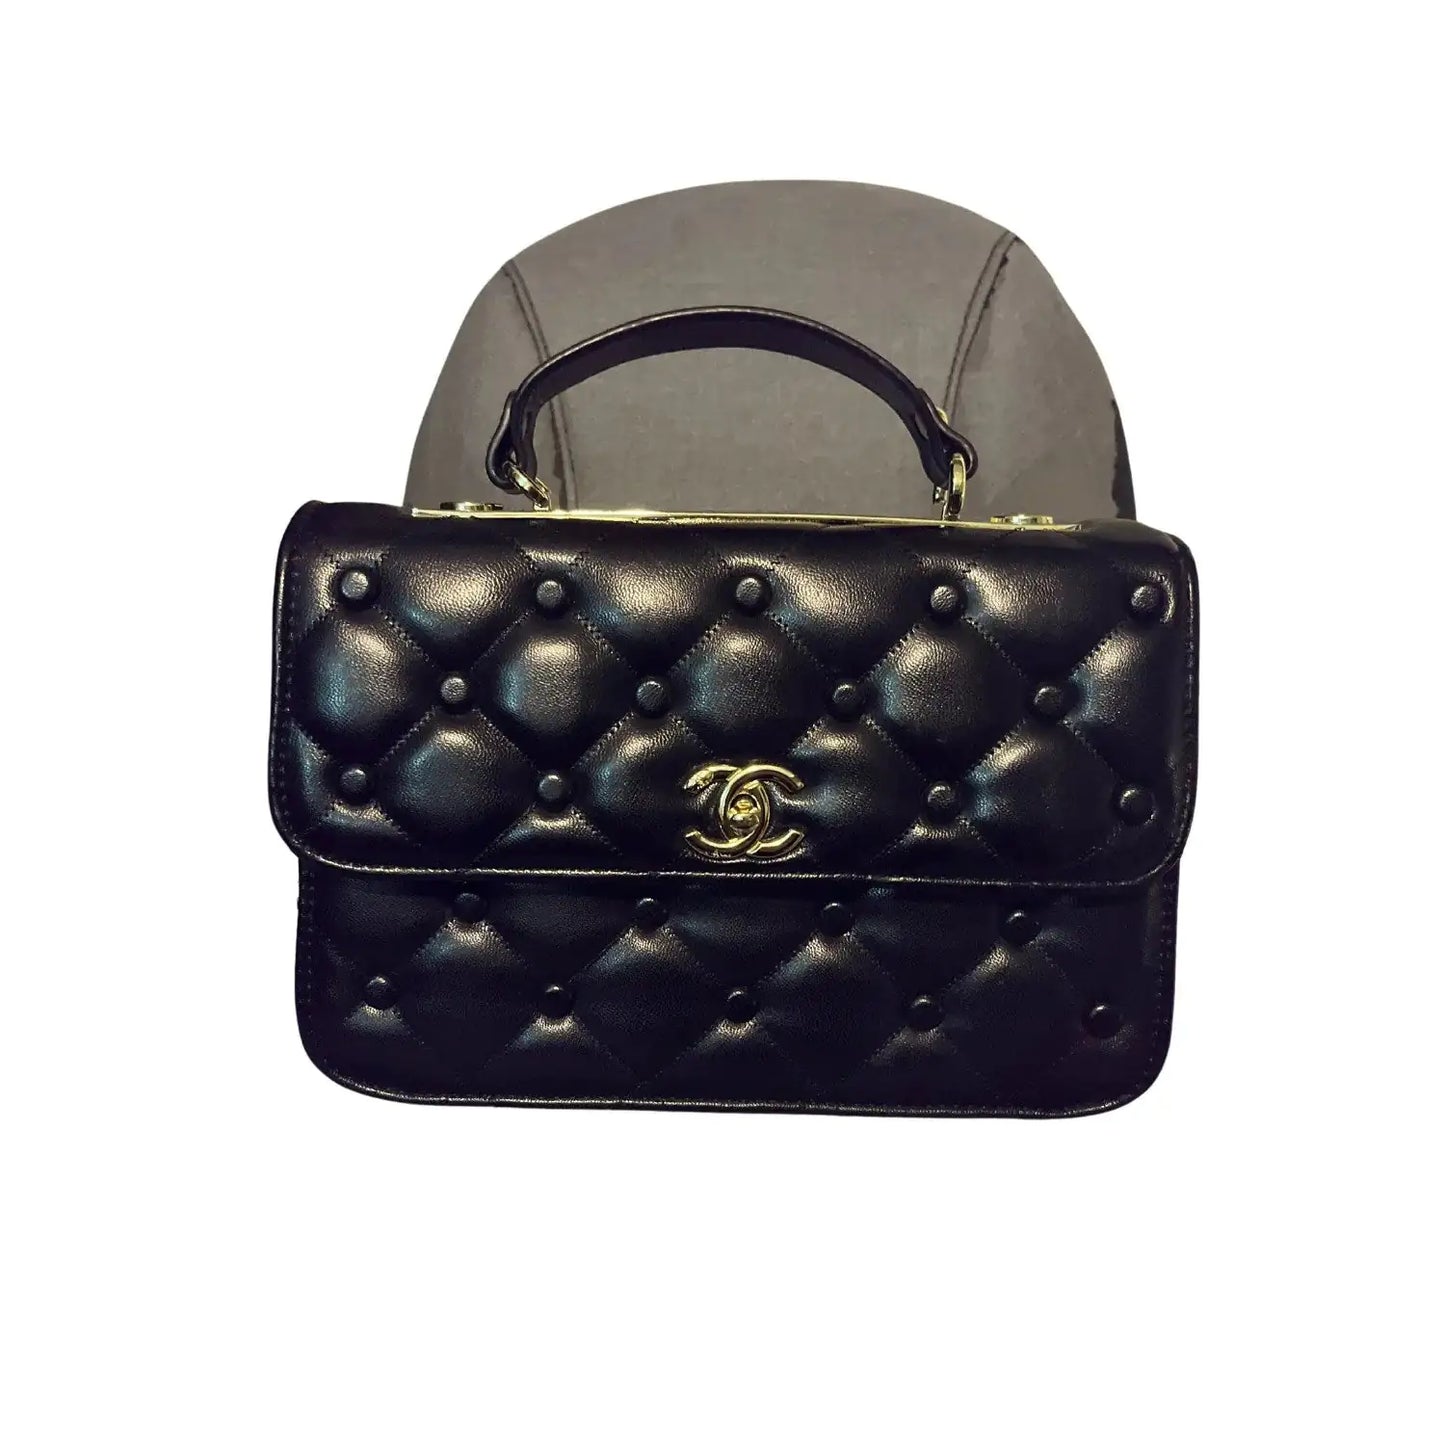 Classic Flap with Top Handle Black Cross Body Bag